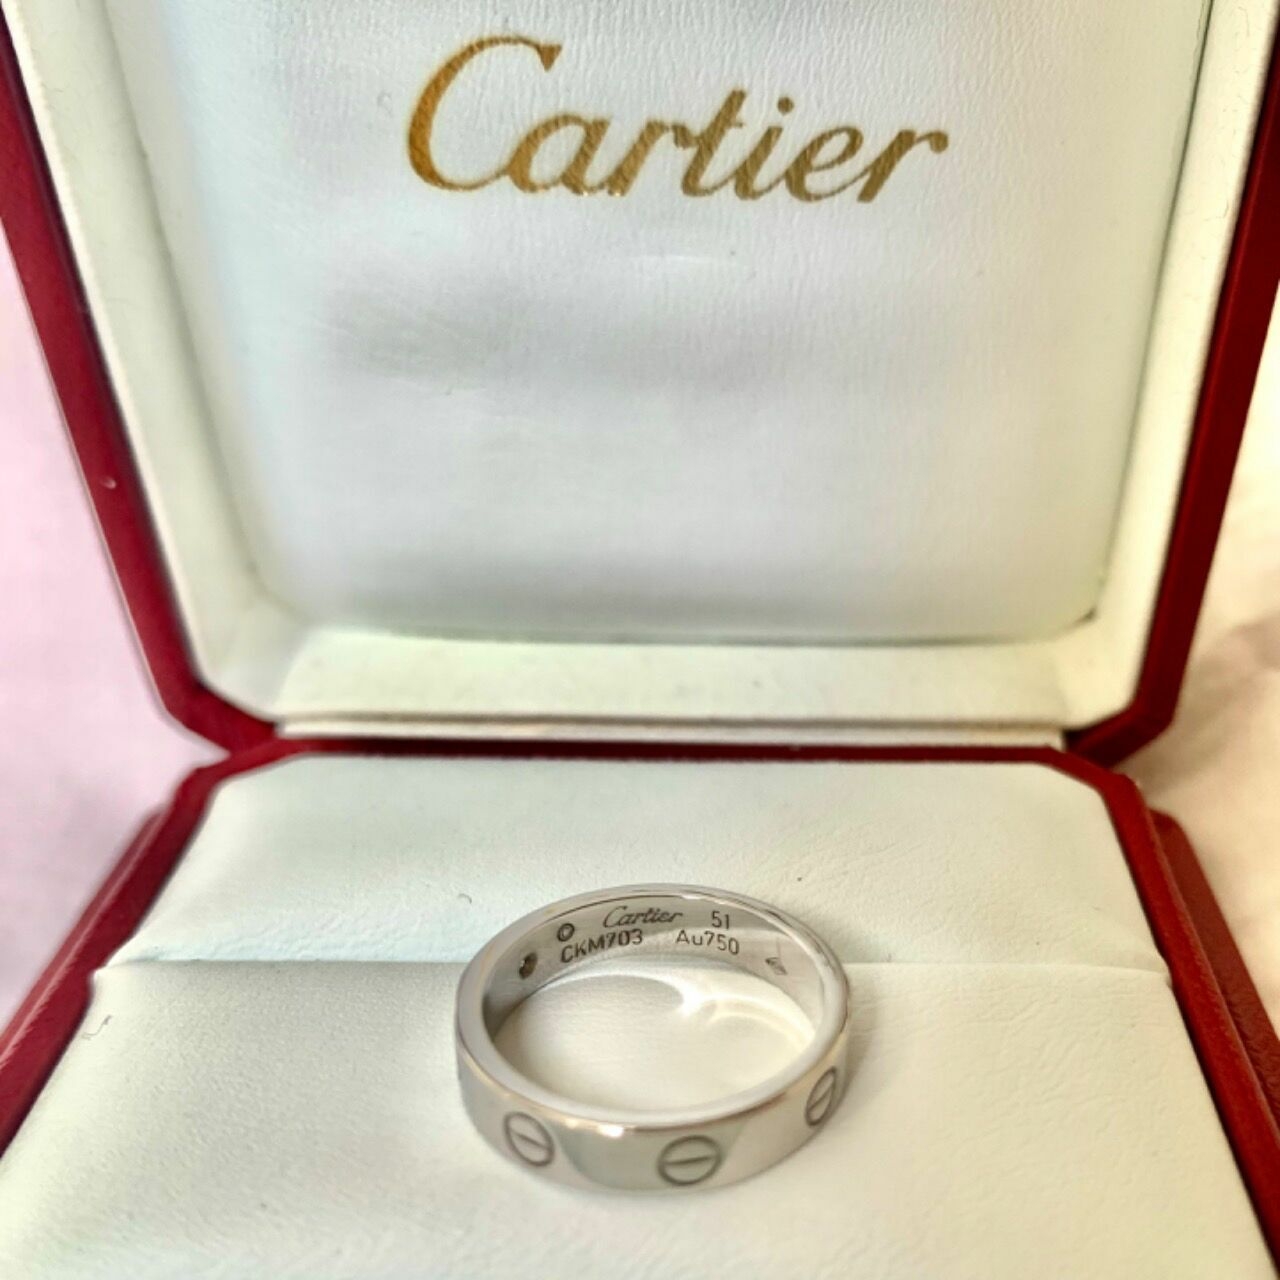 Cartier White Gold Love Band 1 Diamond Mint Condition With Box And Cert